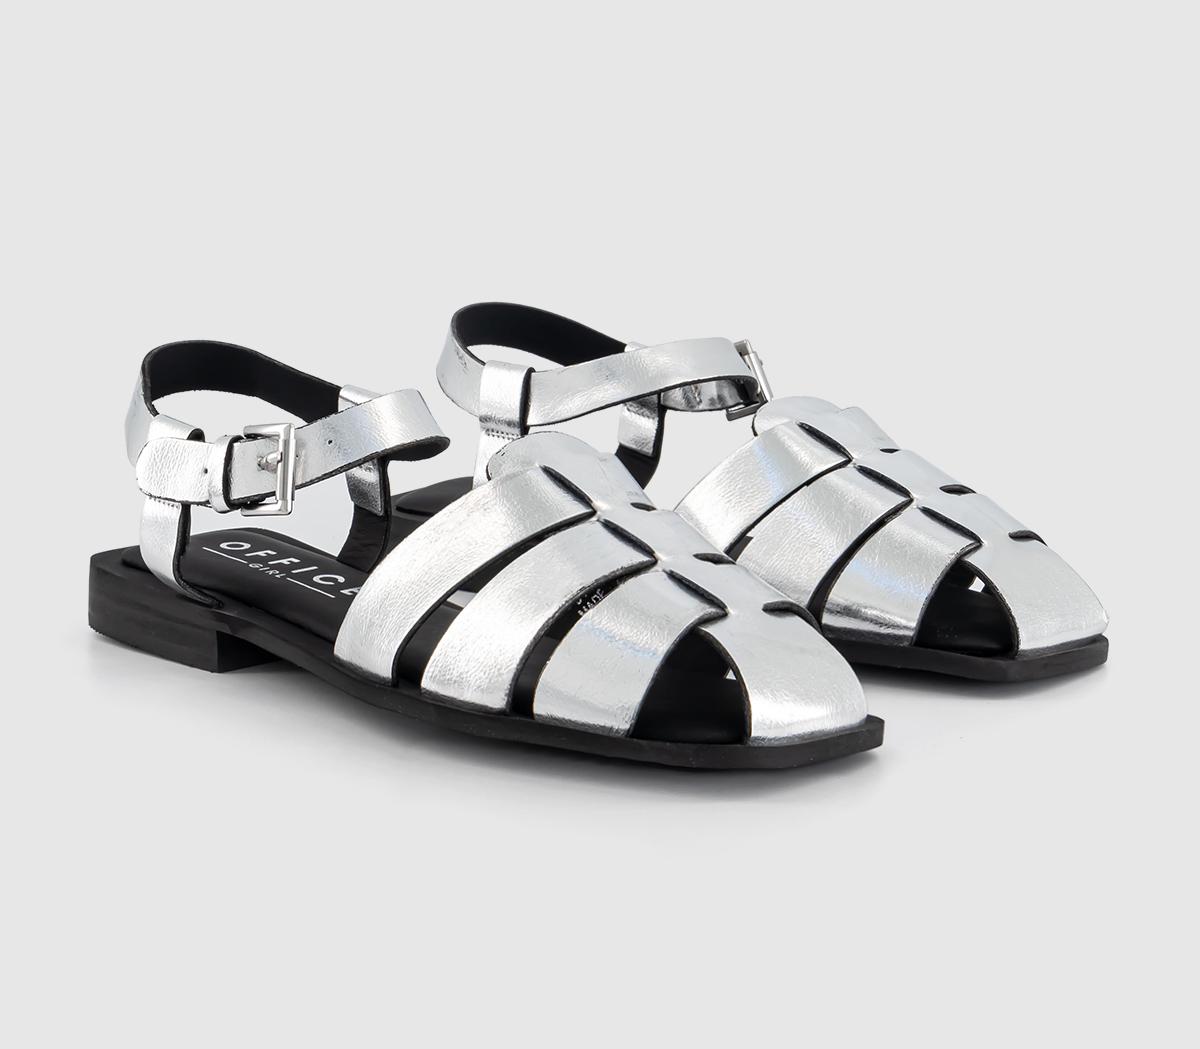 OFFICE Womens Sovereign Gladiator Sandals Silver, 9